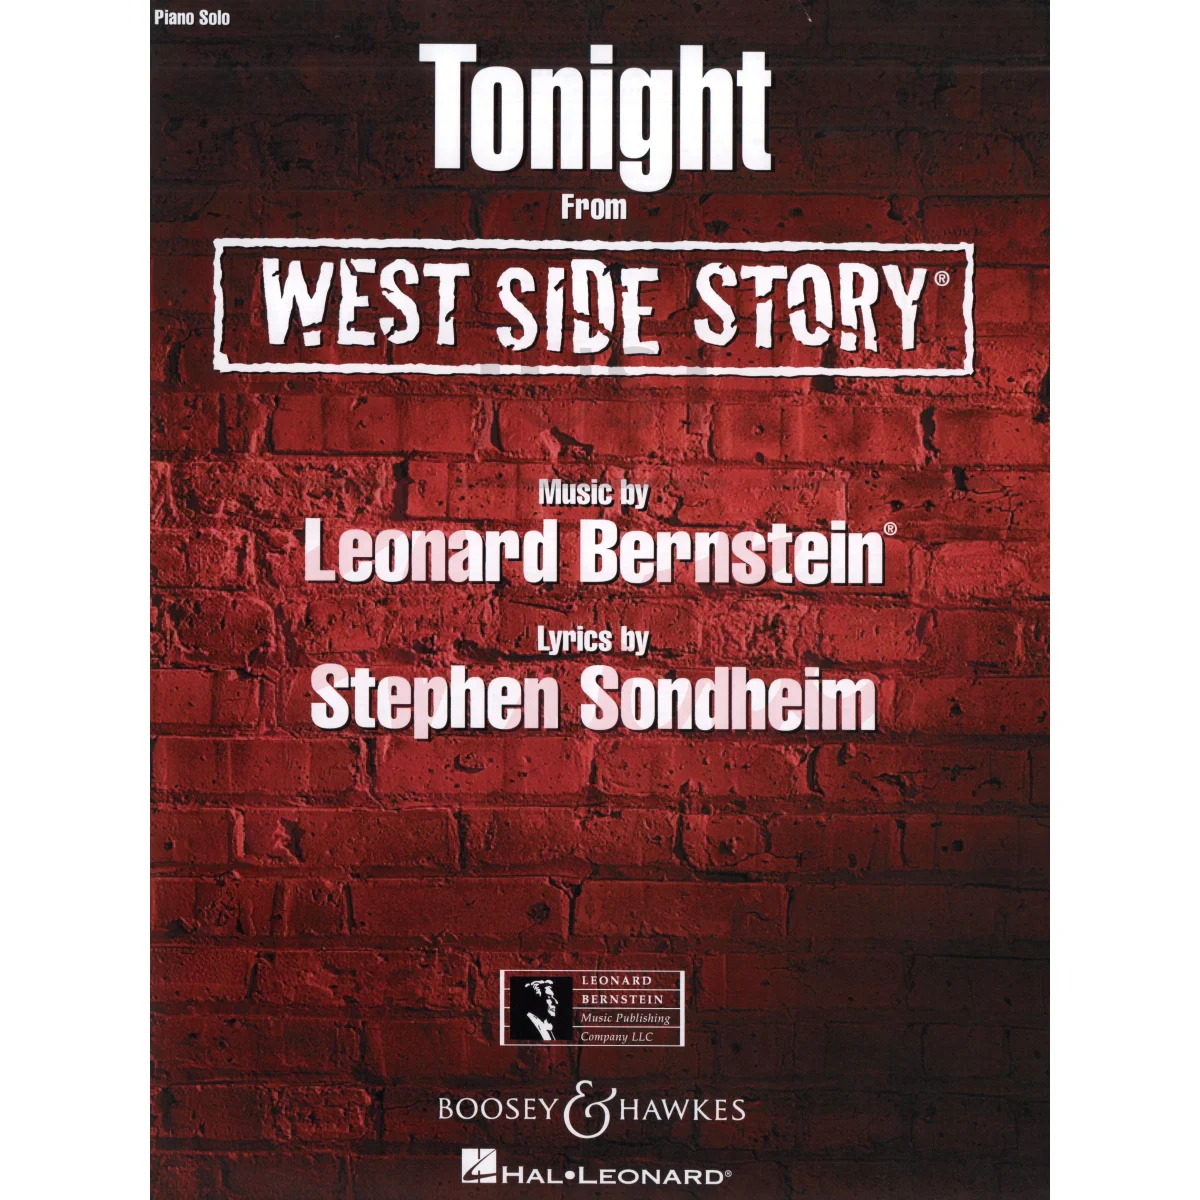 Tonight from West Side Story for Piano Solo